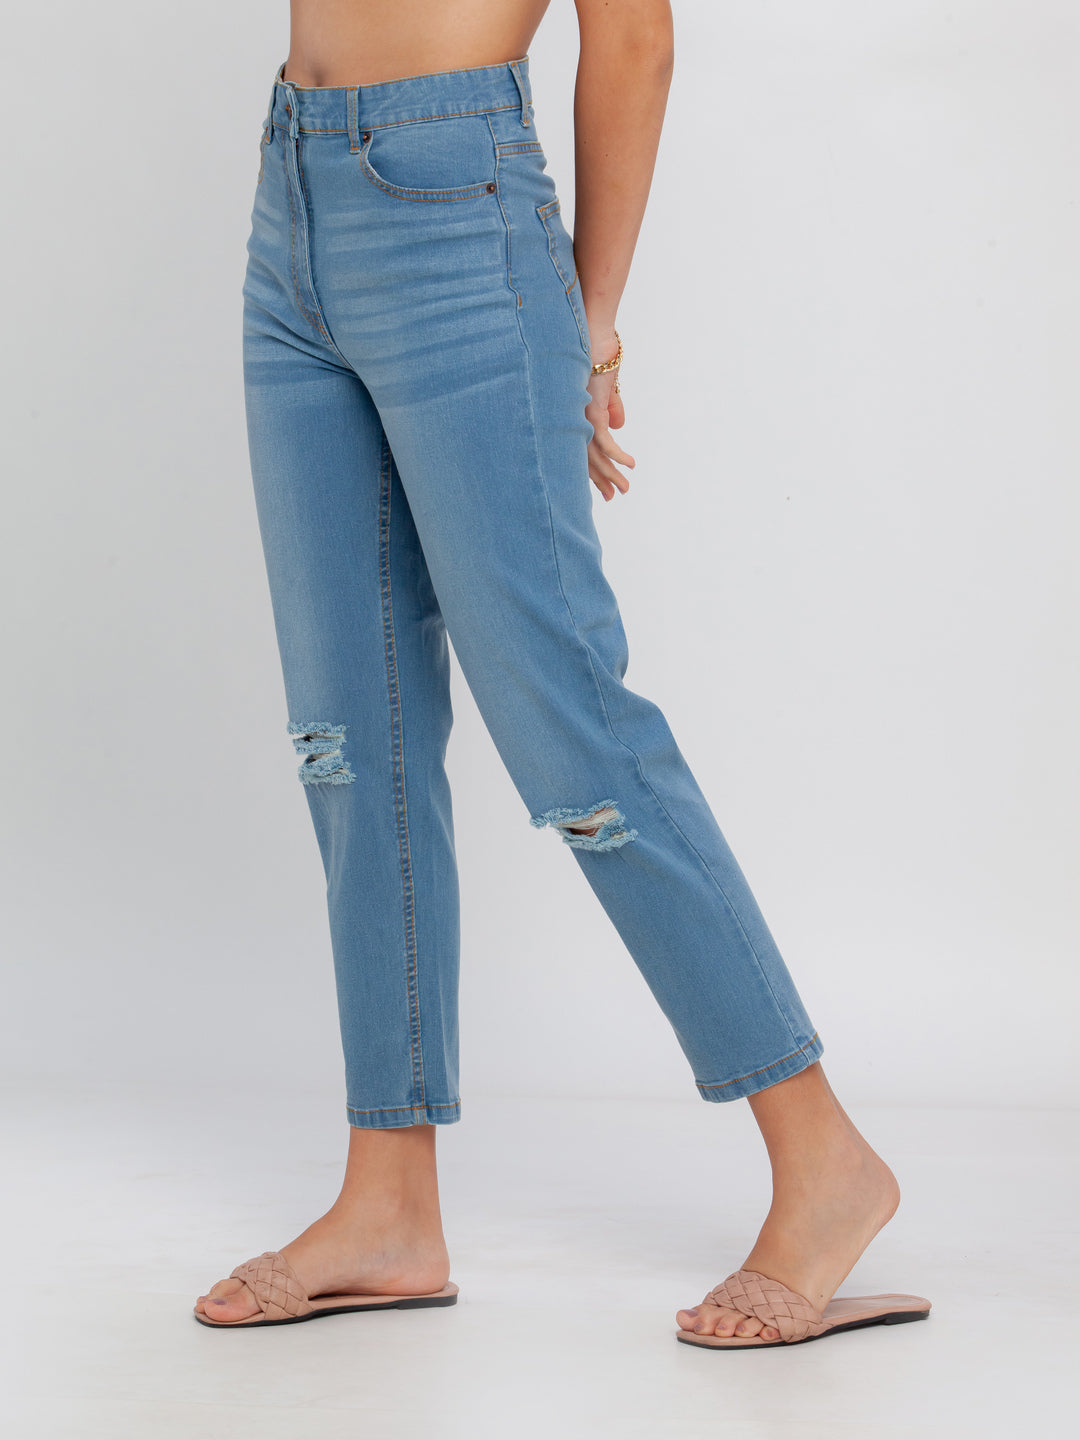 Blue Solid Jeans For Women